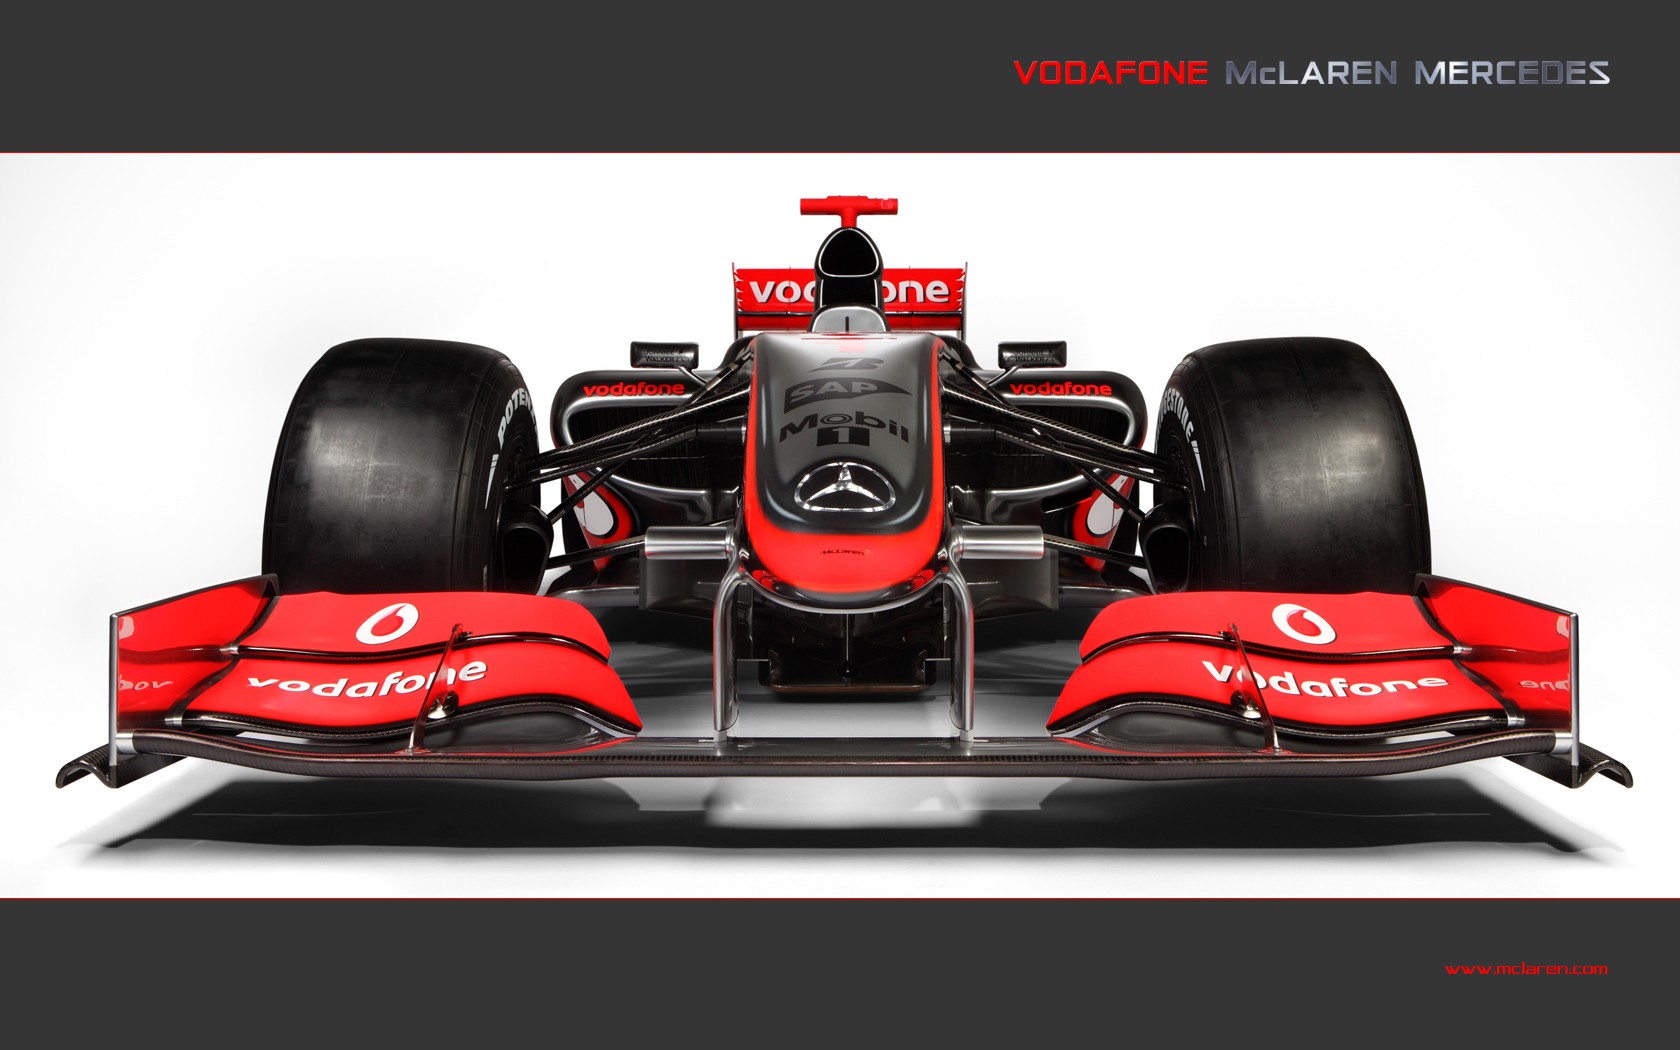 General 1680x1050 Formula 1 race cars vehicle car red cars Mercedes-Benz simple background motorsport white background